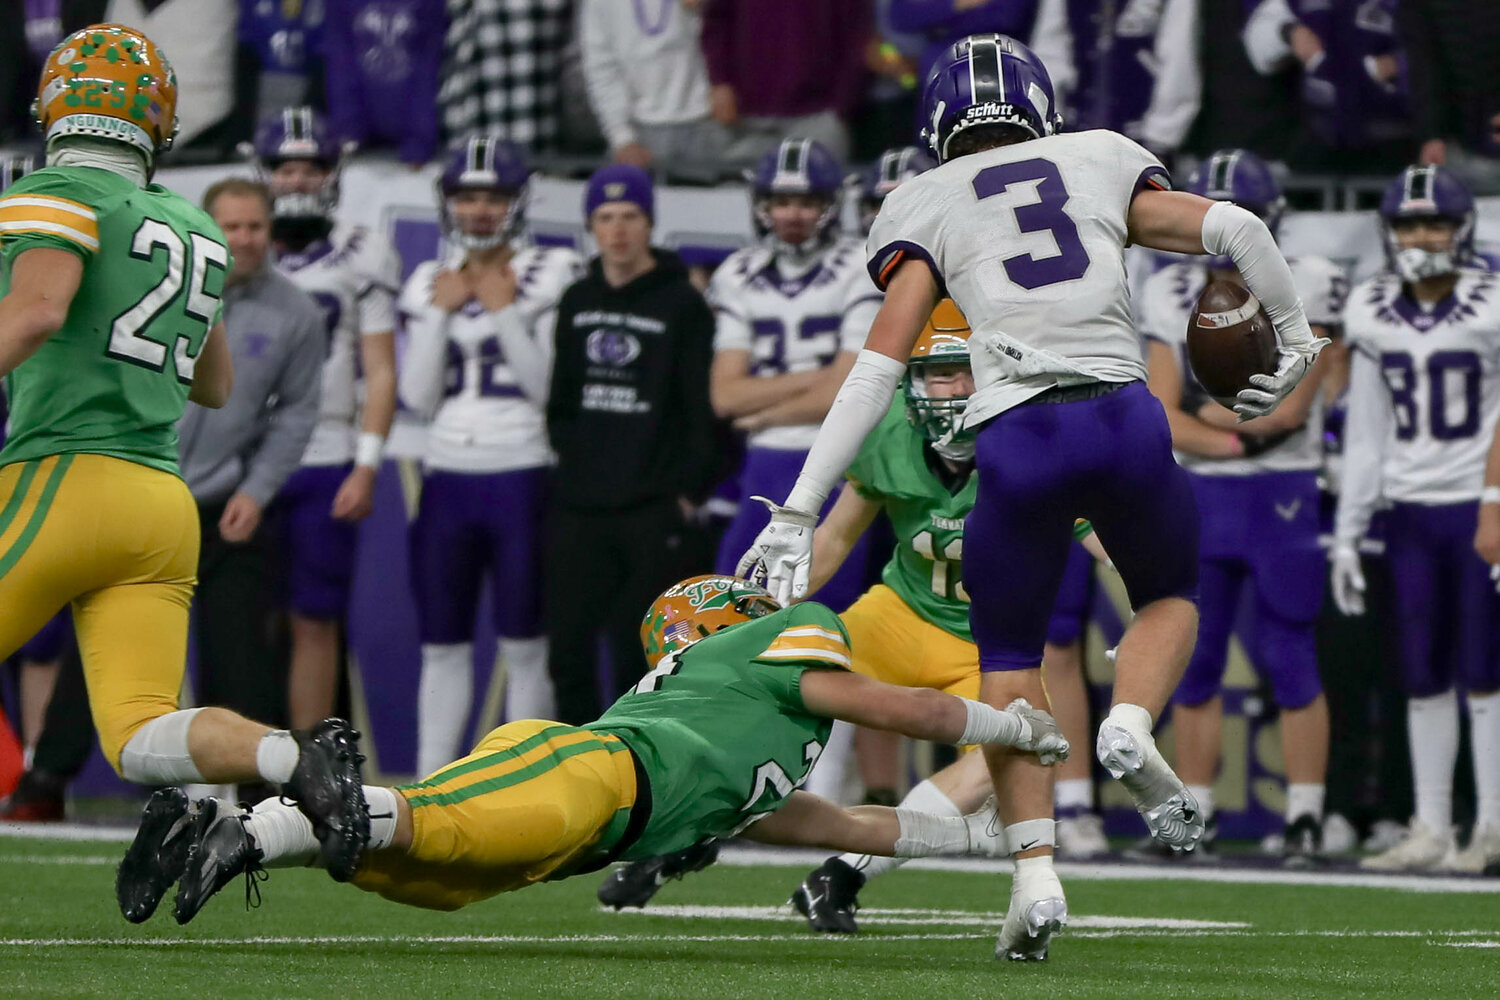 Tumwater's Tyler Criss dives for a tackle during a 60-30 loss to Anacortes Dec. 2. at Husky Stadium.